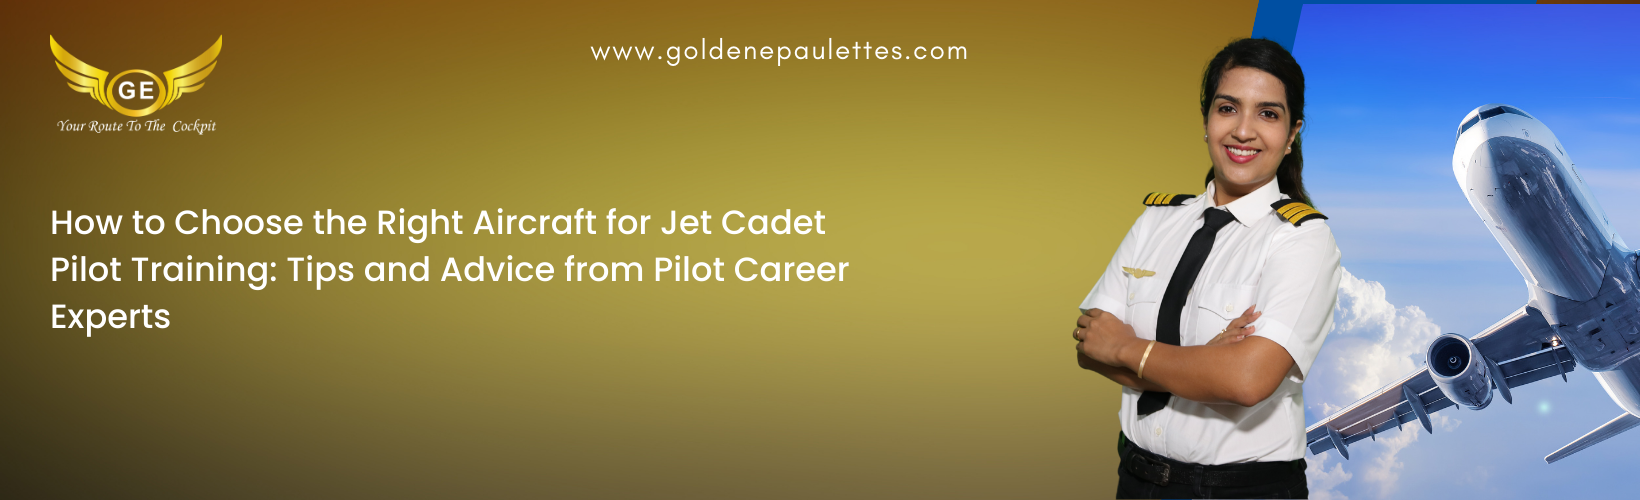 What to Expect During Jet Cadet Pilot Ground Training